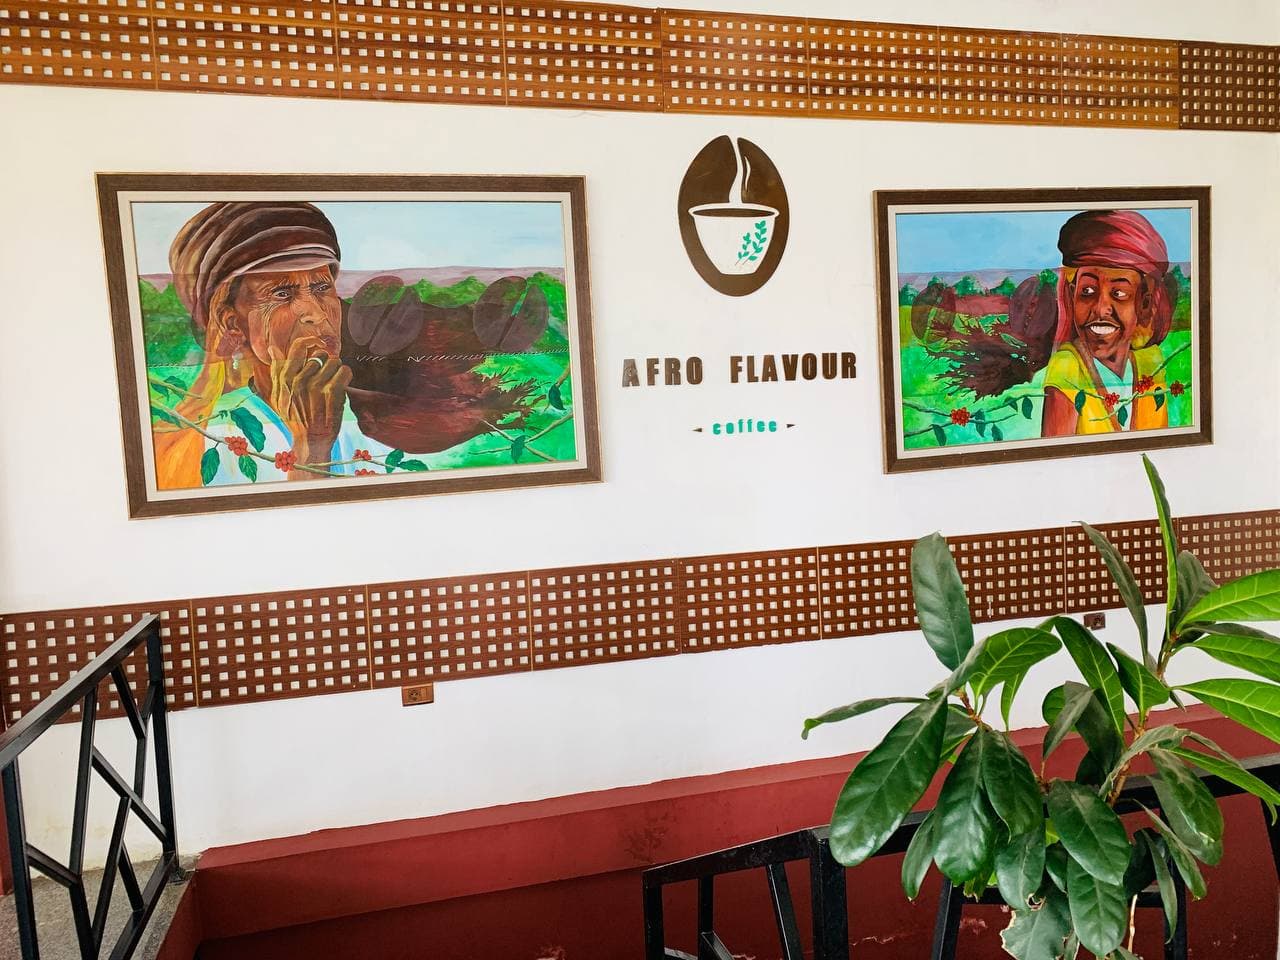 Afro Flavor Cafe